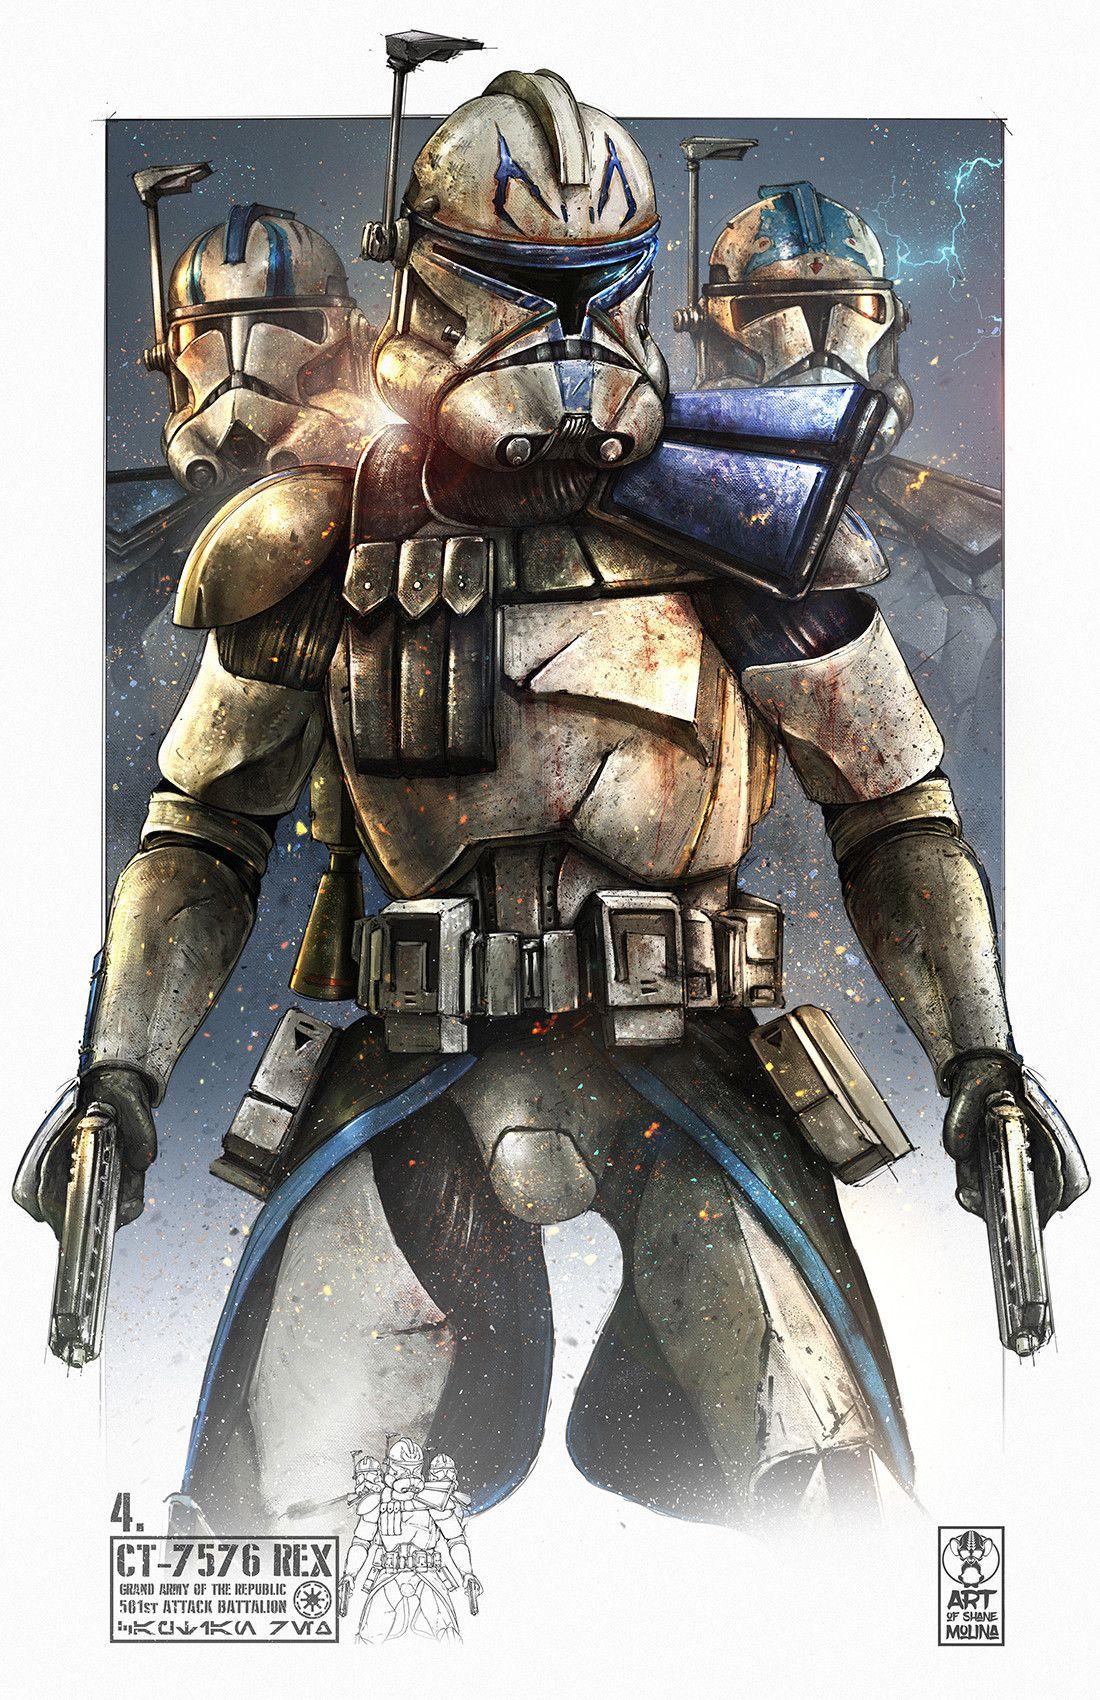 CT 7576 Captain Rex By Shane Molina. Clones. Star Wars